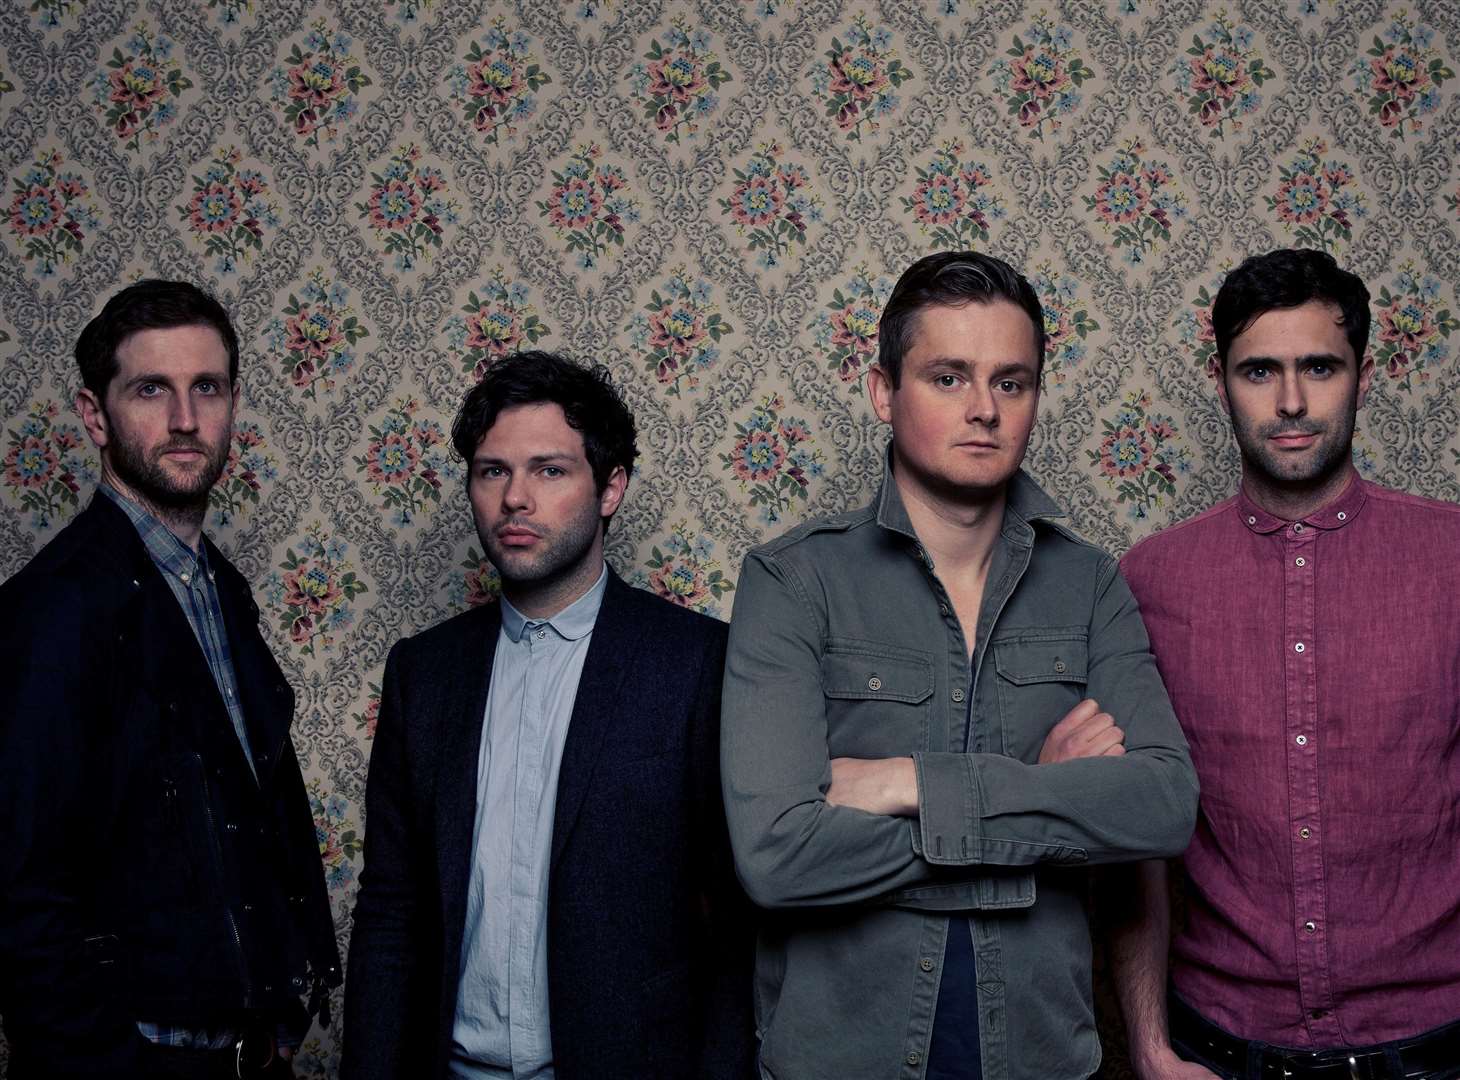 The frontman of rock band Keane, Tom Chaplin, was one of Tony's past pupils